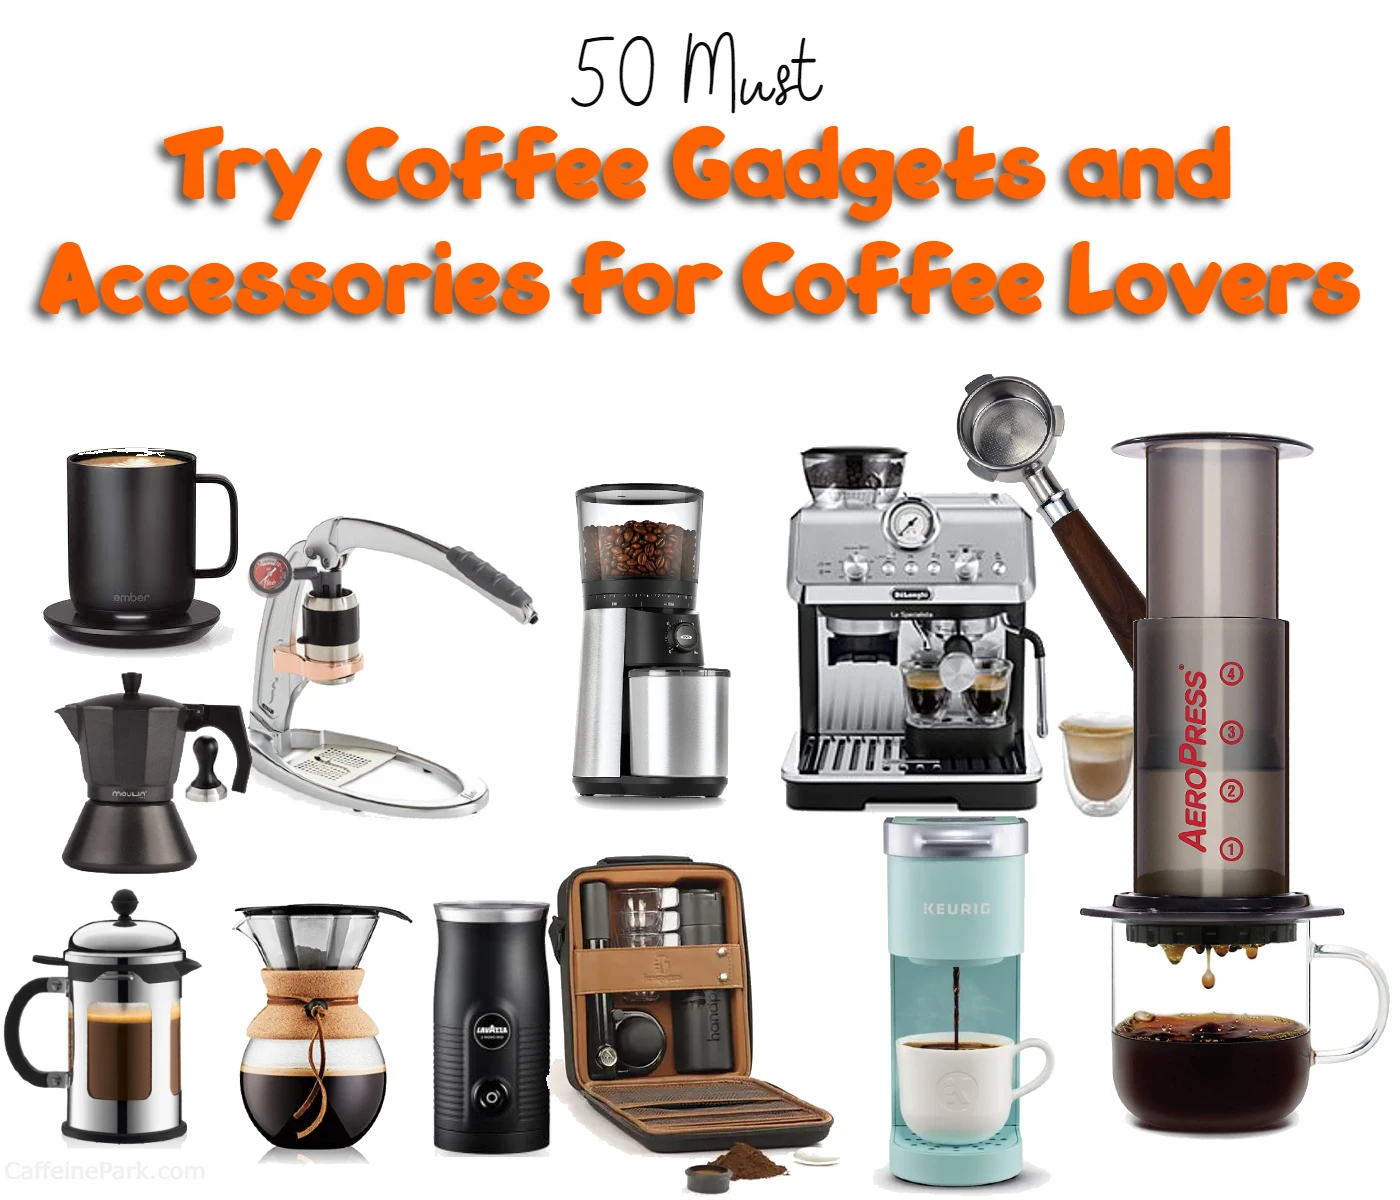 Glorious økologisk coping The Top 50 Coffee Gadgets and Accessories You Need to Try